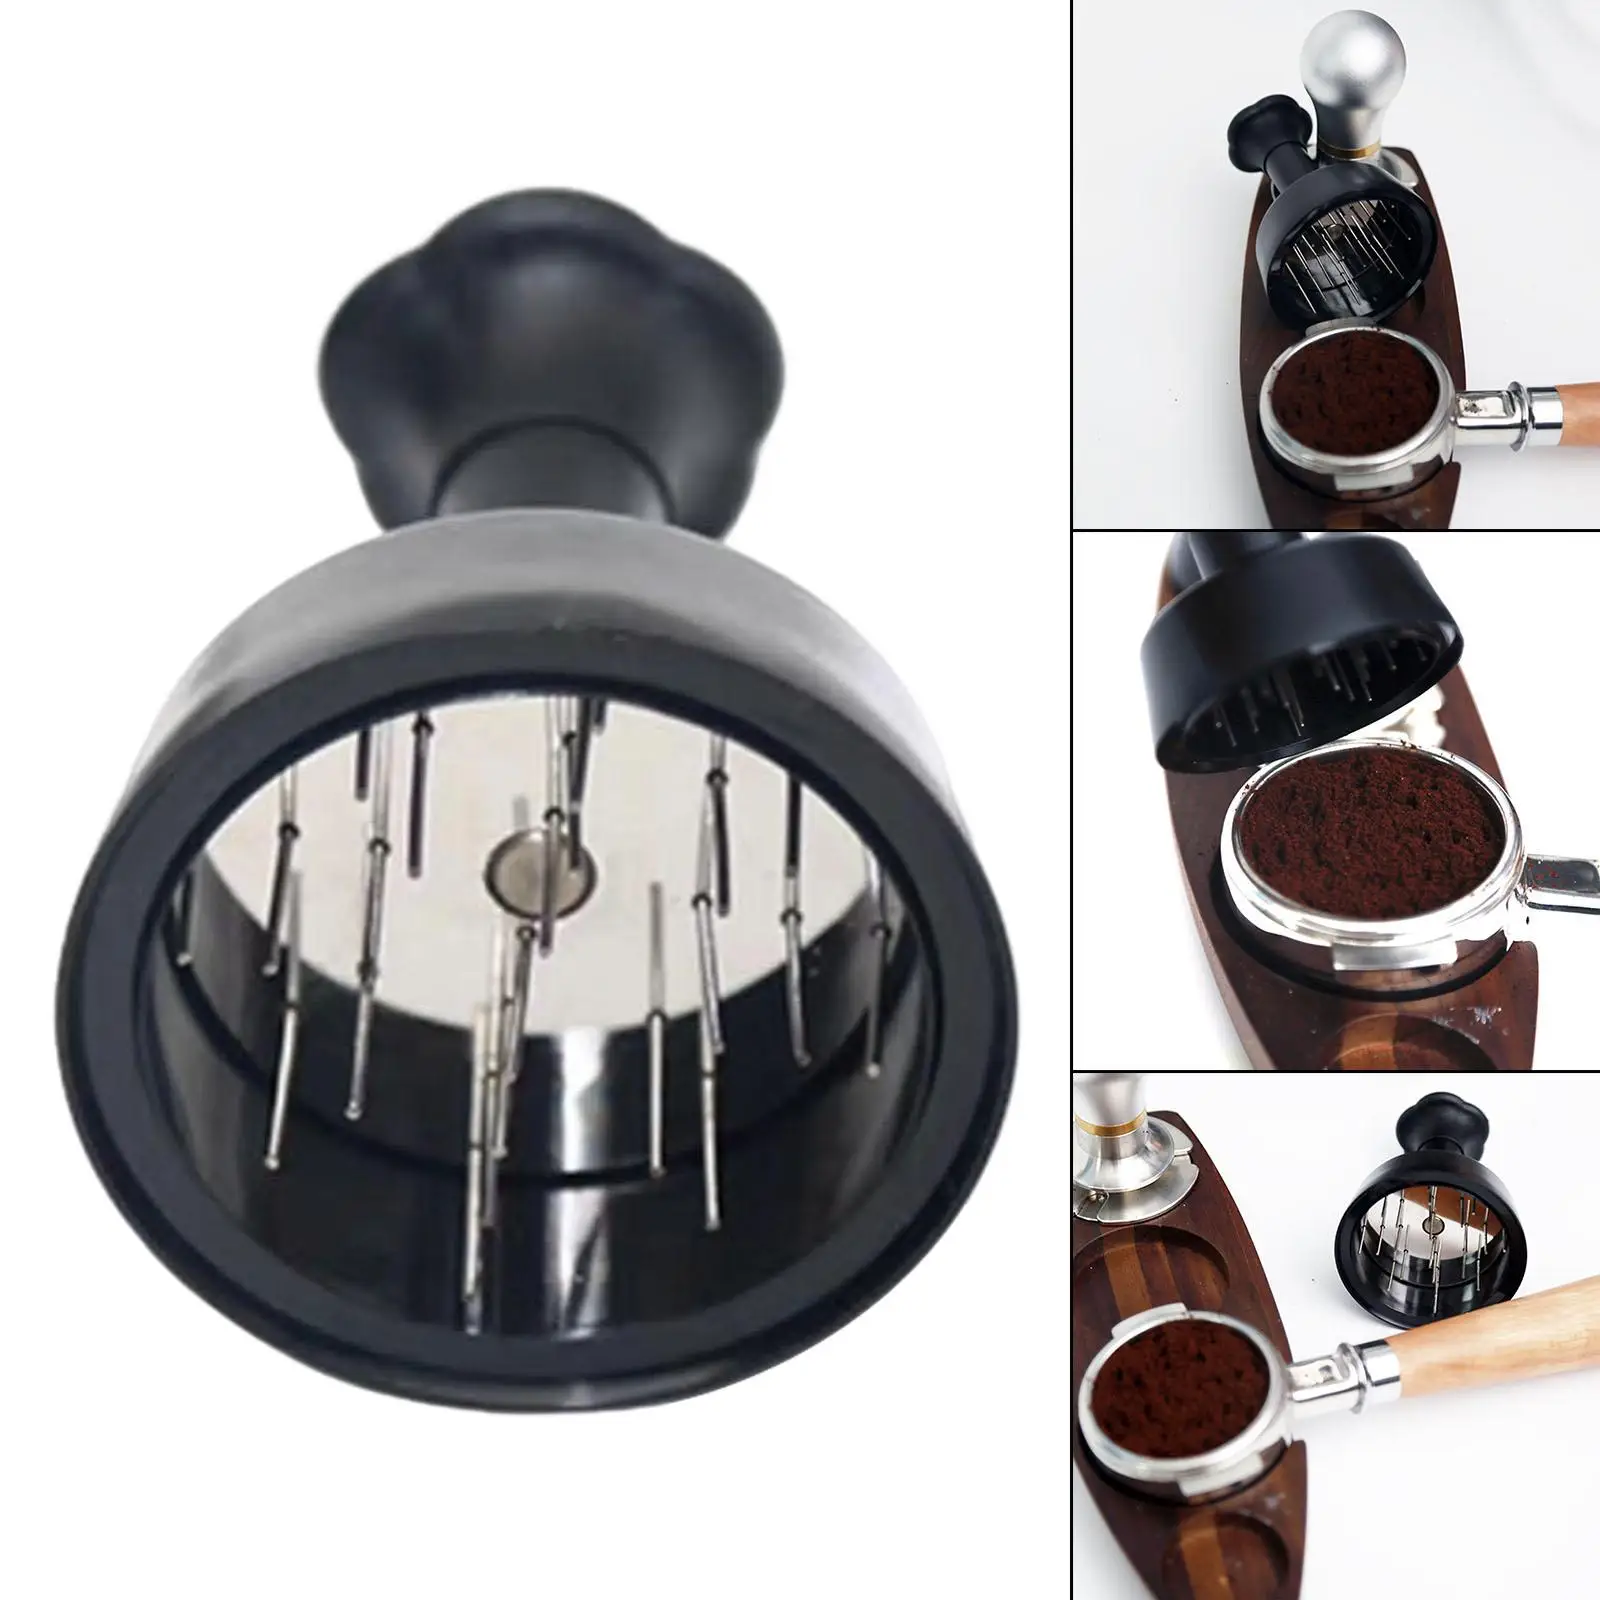 Needle Style Coffee Tamper Distributor Coffee Stirrer Powder Distribution Espresso Distribution Tool for Office Home